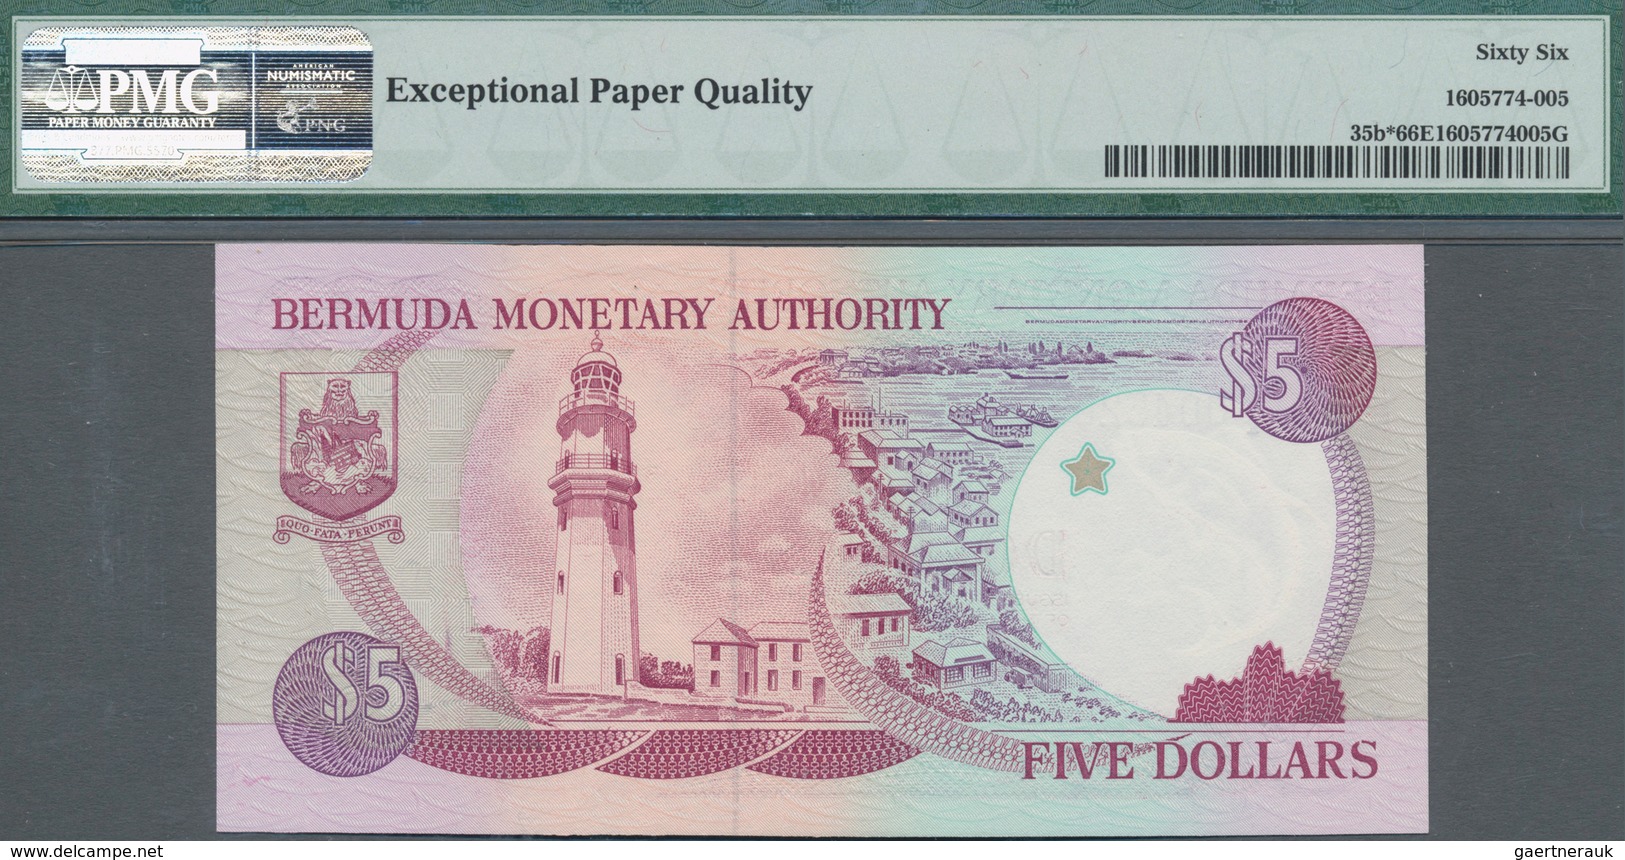 Bermuda: Group of 5 banknotes 5 Dollars 1989 REPLACEMENT, P.35b with prefix "Z" in UNC condition, al